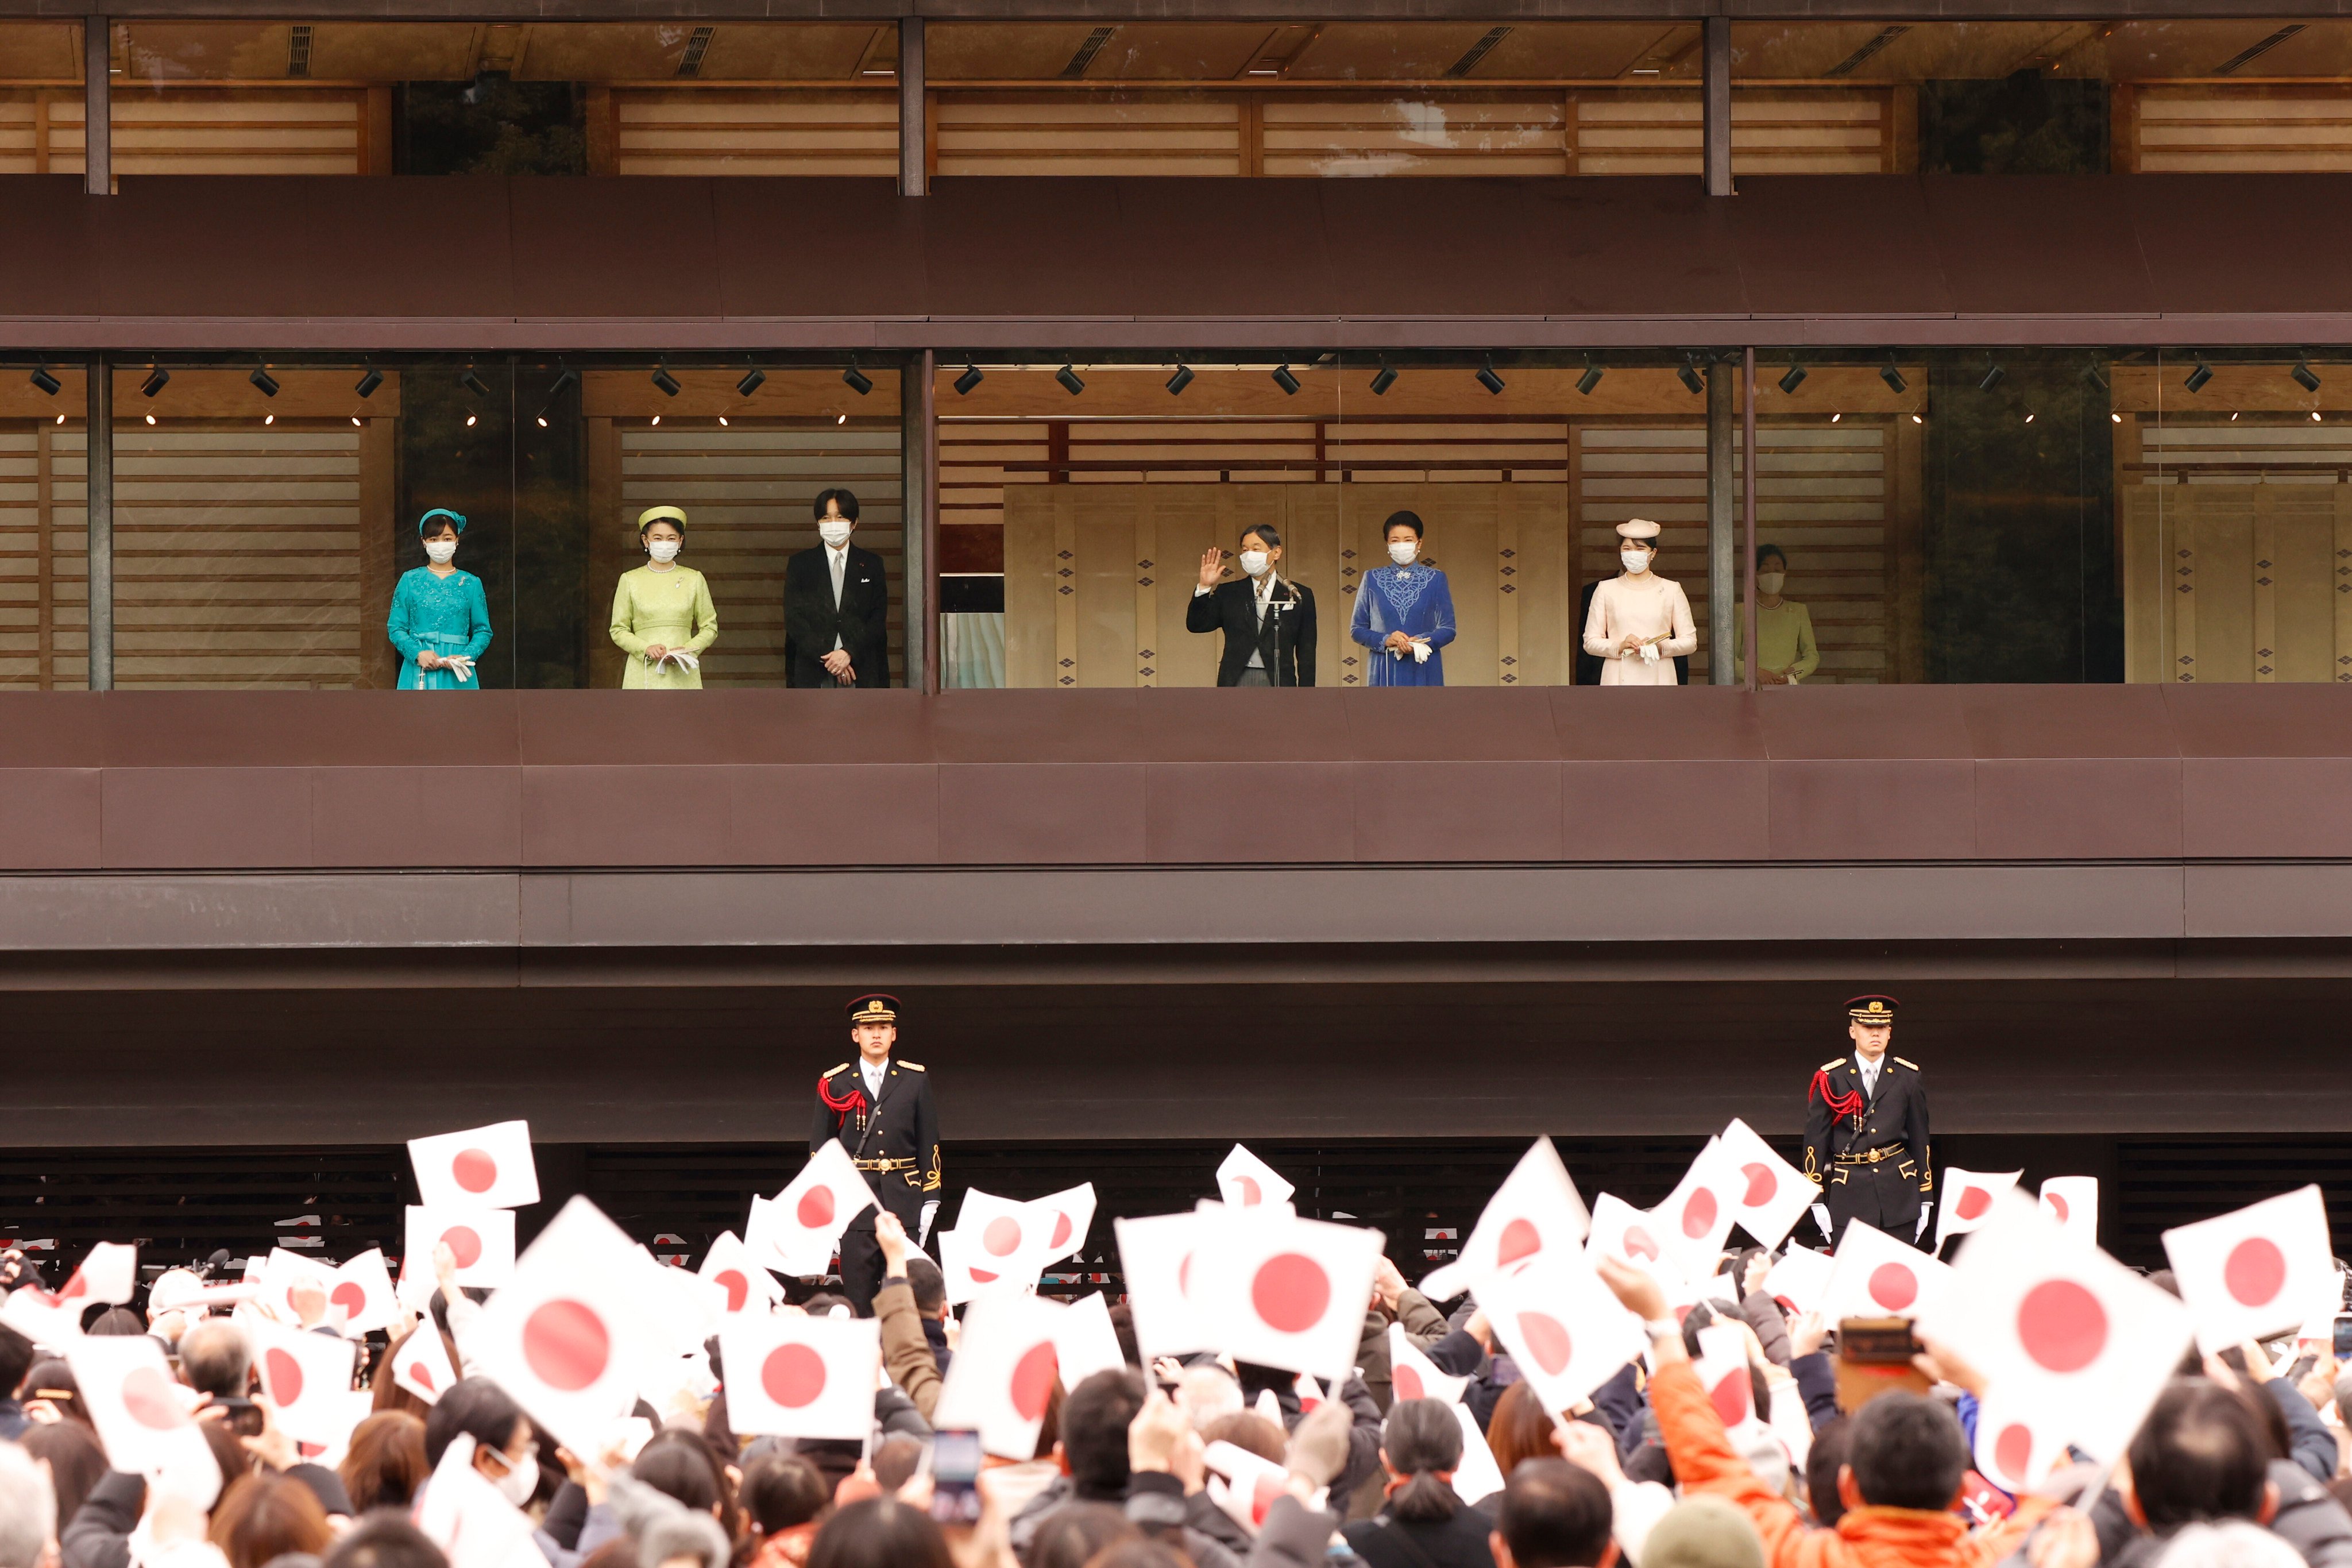 Japan’s Emperor Naruhito, accompanied by other imperial family members, waves to audience members during his birthday celebration at the Imperial Palace in Tokyo on February 23. Photo: AP